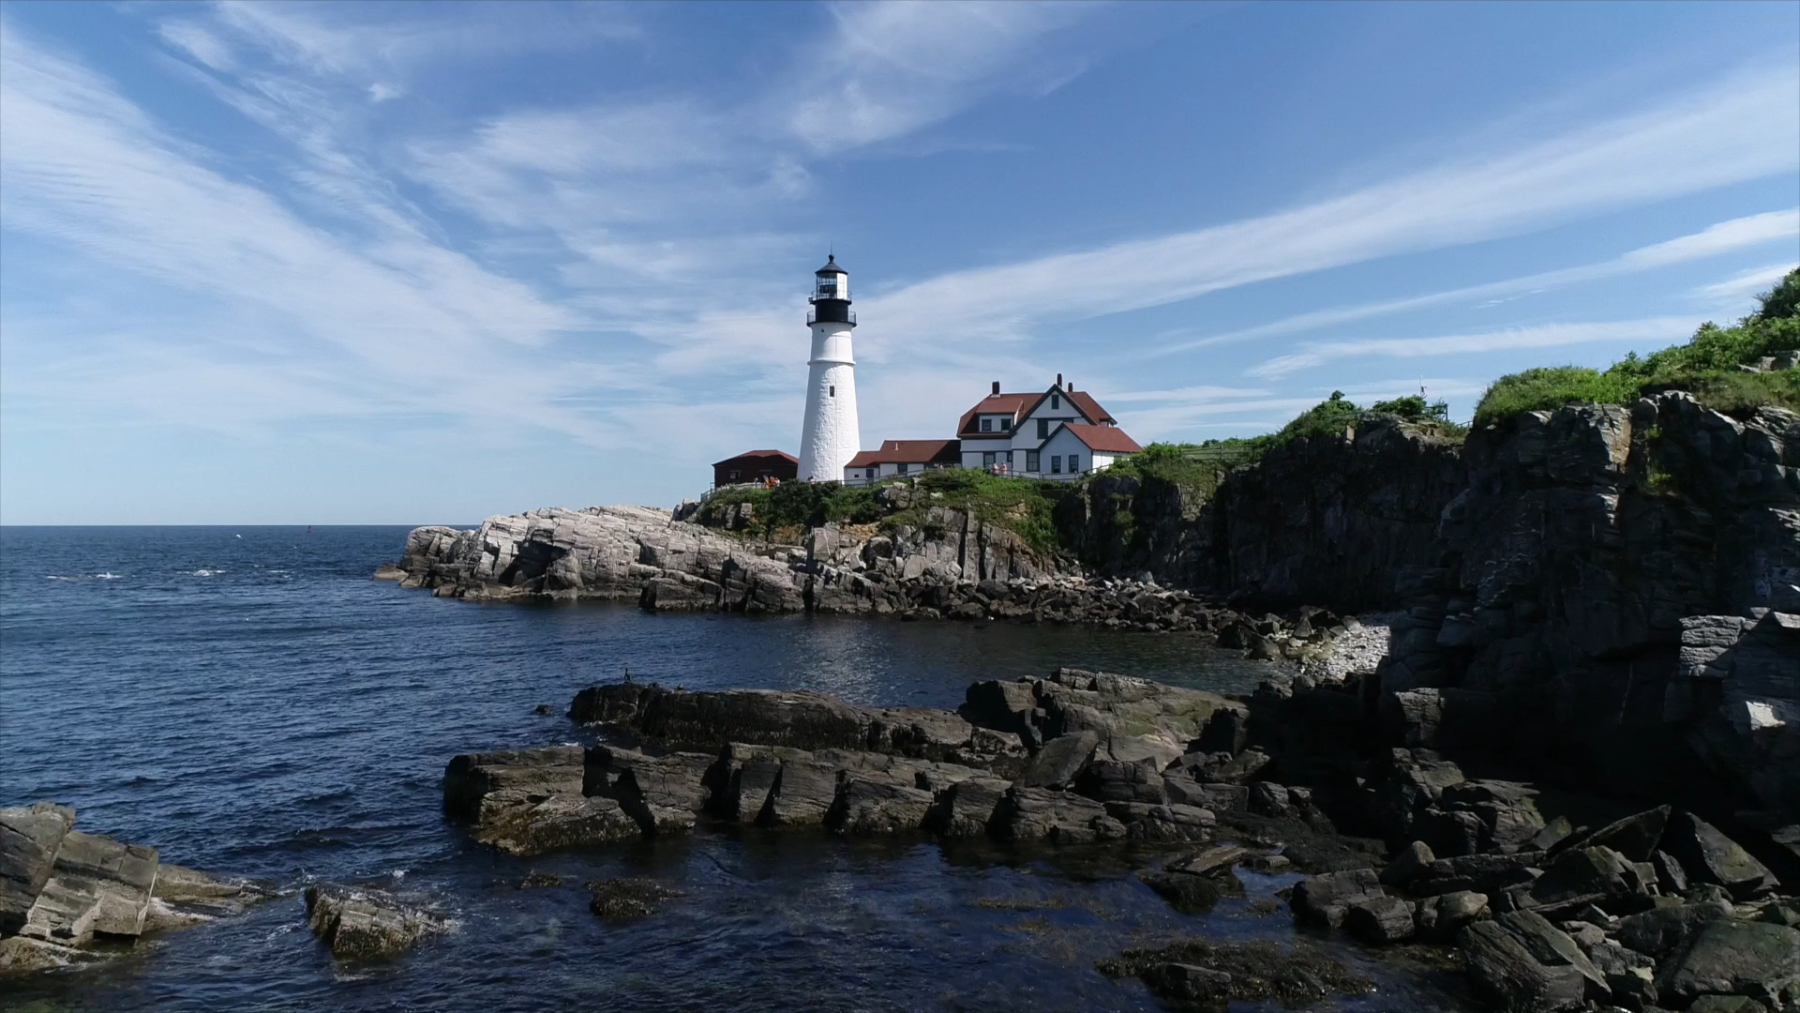 A picture of a lighthouse in Maine